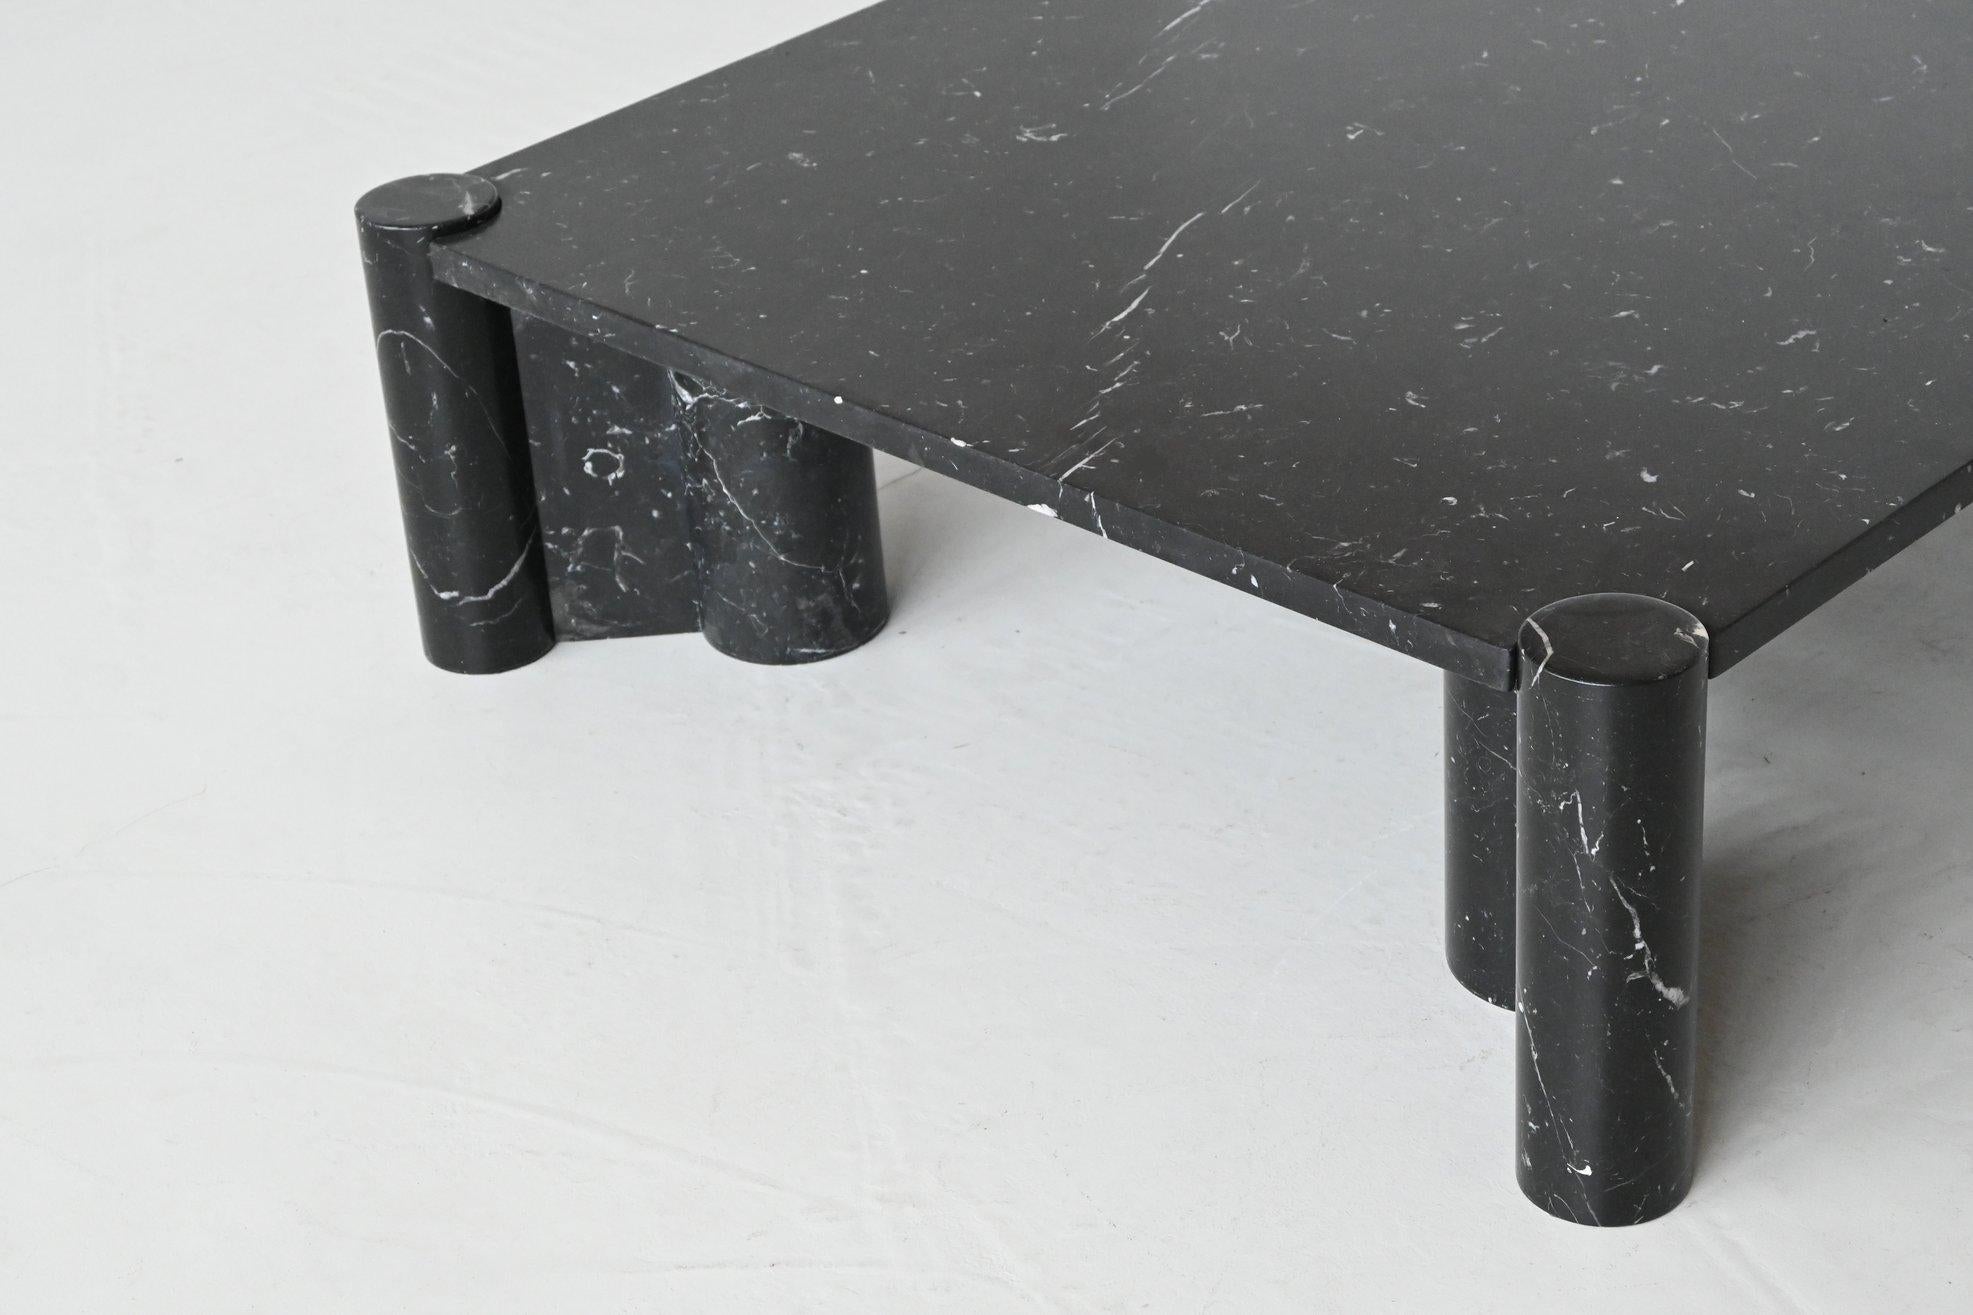 Gae Aulenti Jumbo coffee table black marble Knoll International Italy 1965 In Good Condition For Sale In Etten-Leur, NL